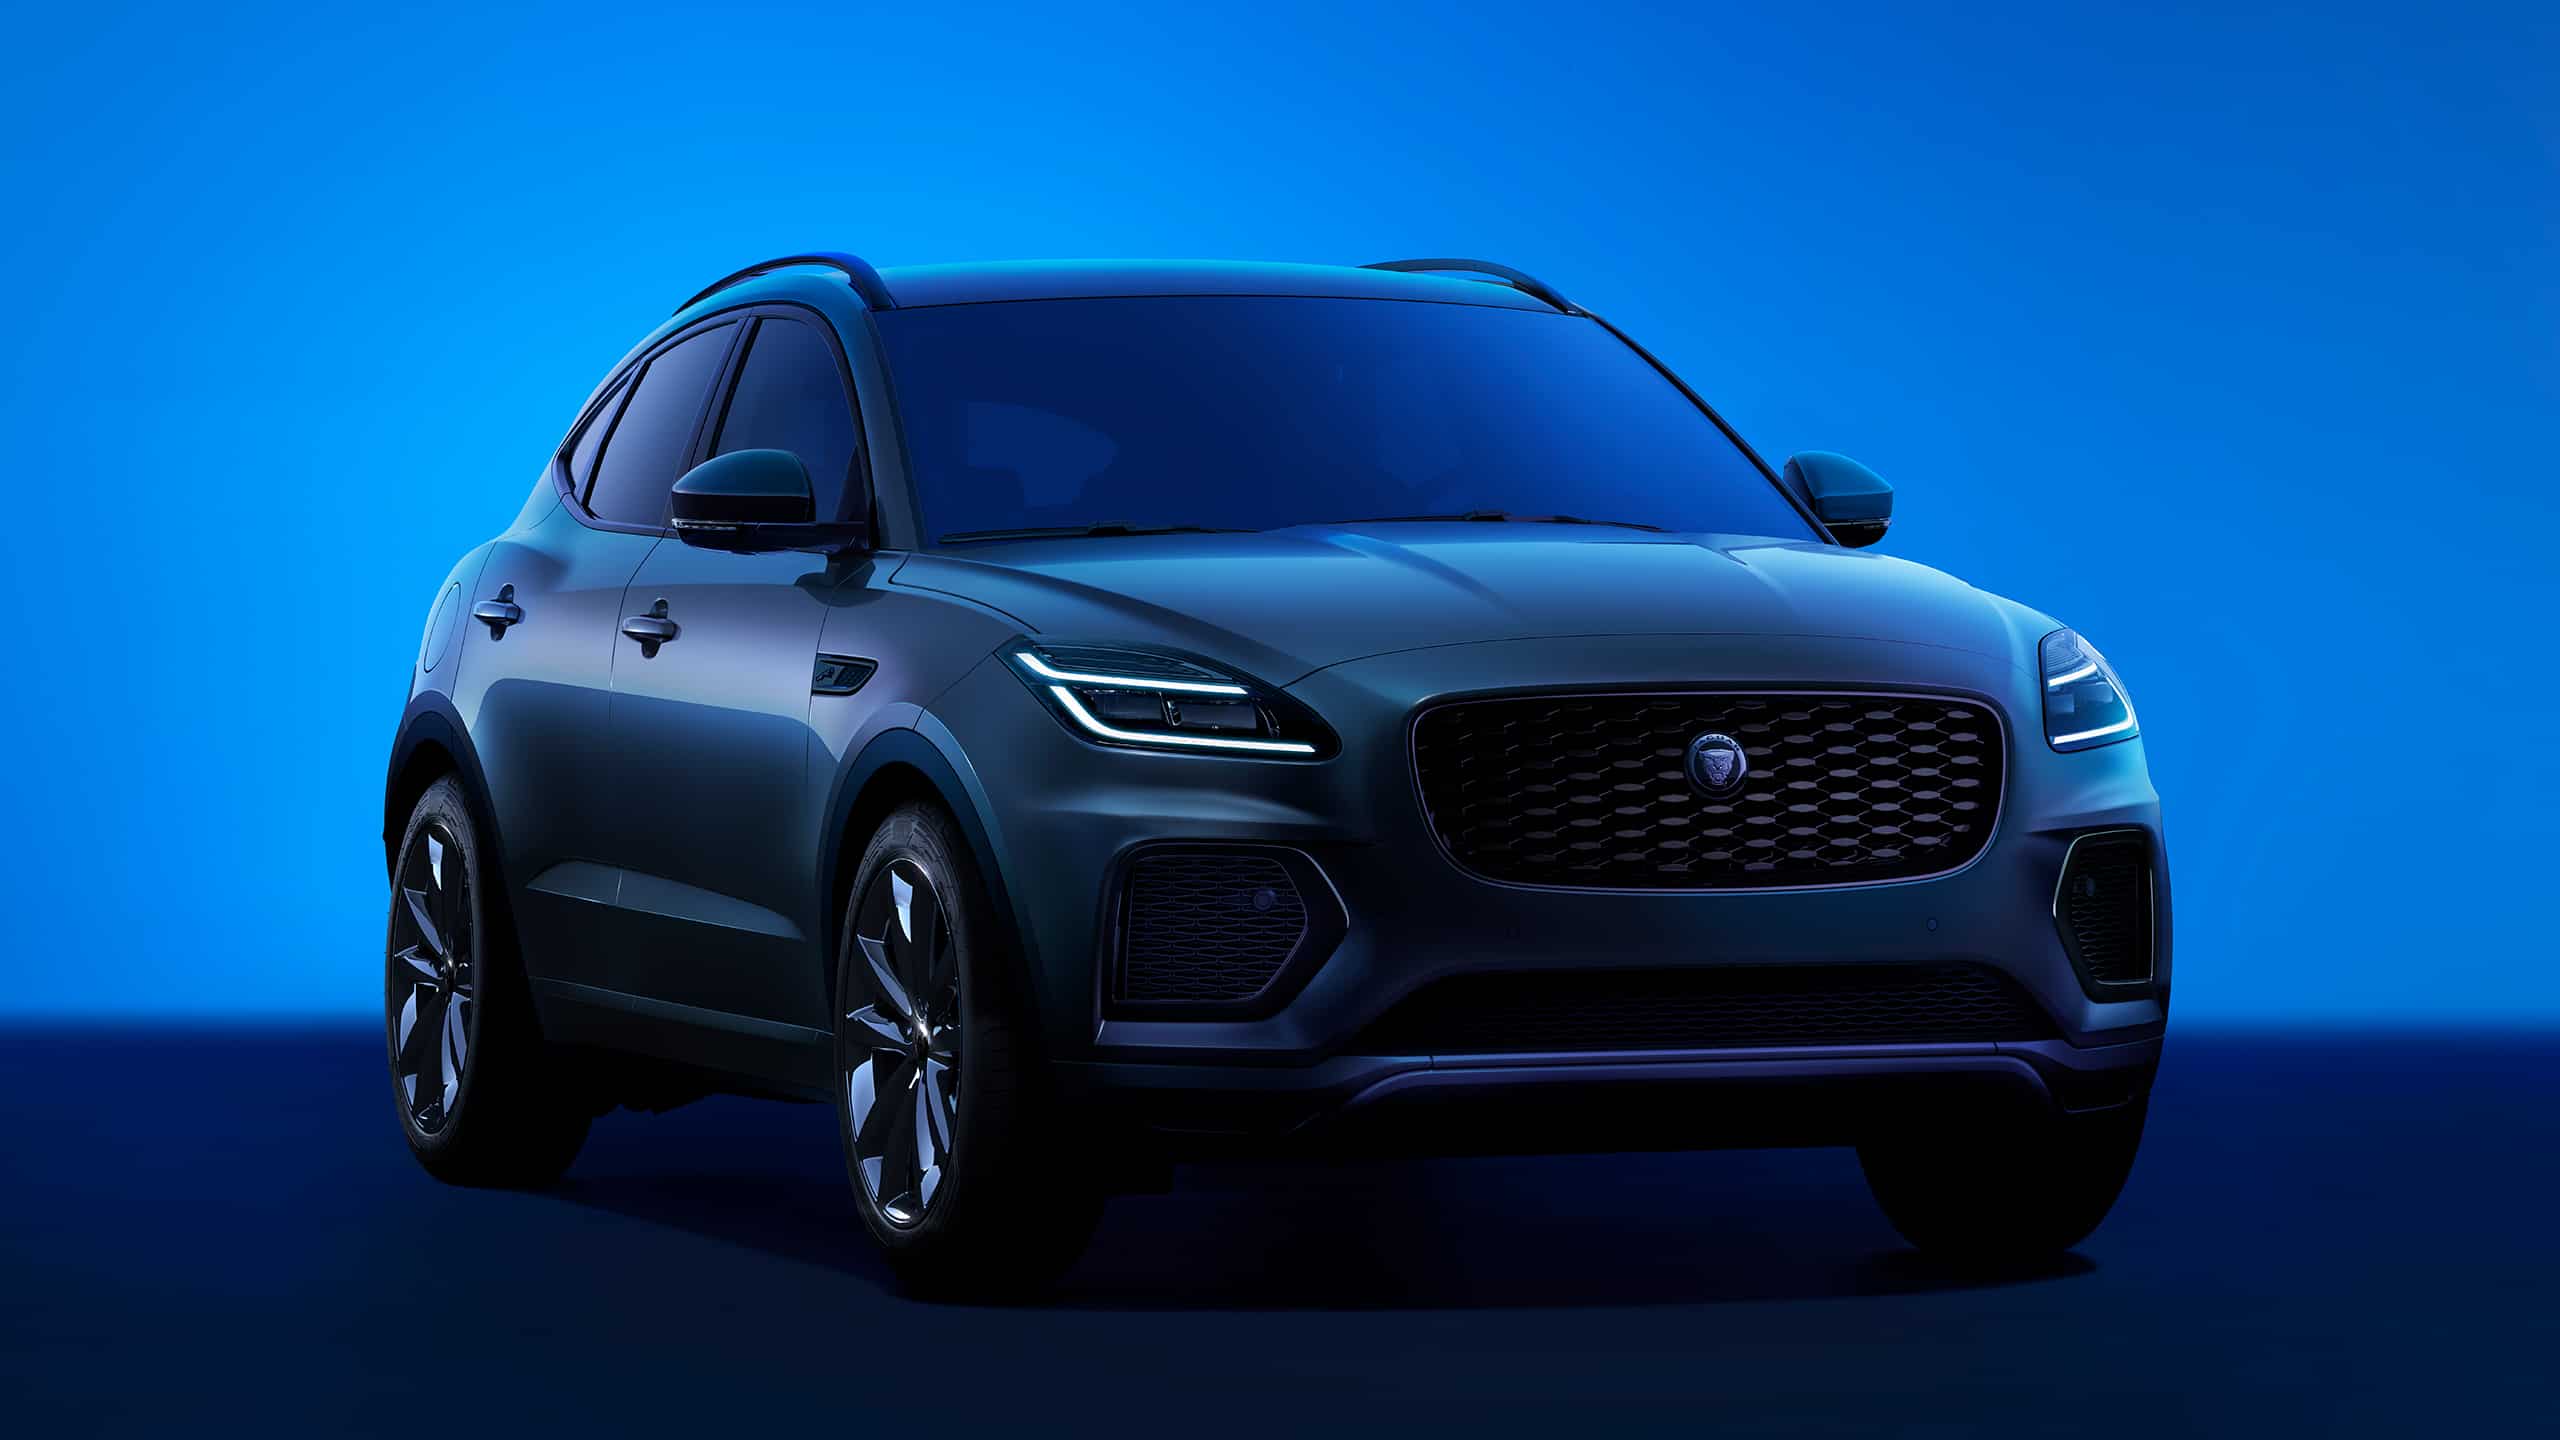 Representation of E-Pace on blue background